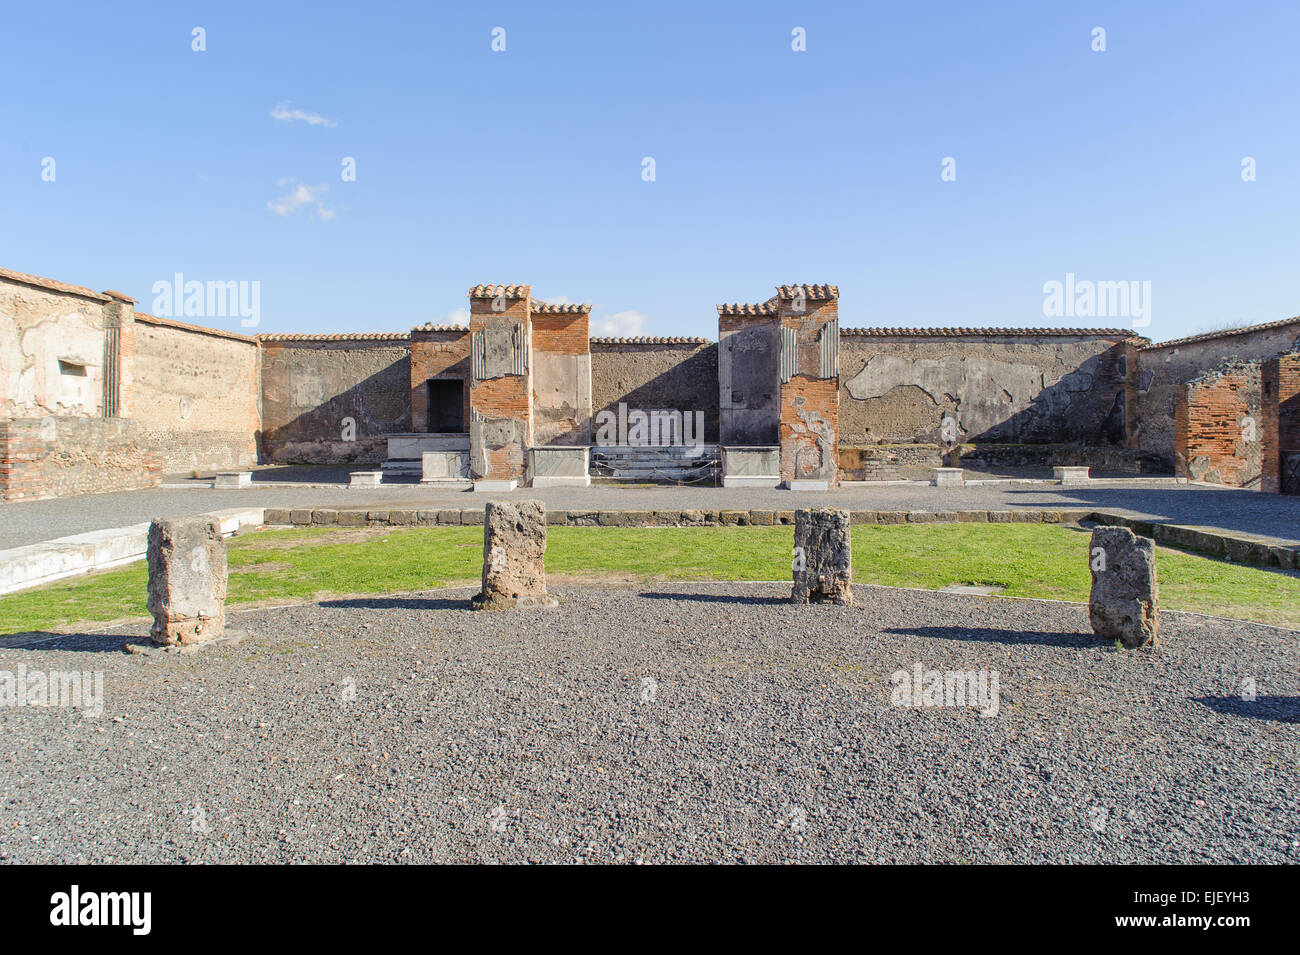 ruined market place in Pompeii. Pompeii is a ruin of acient Roman City near Naples in Italy. Stock Photo